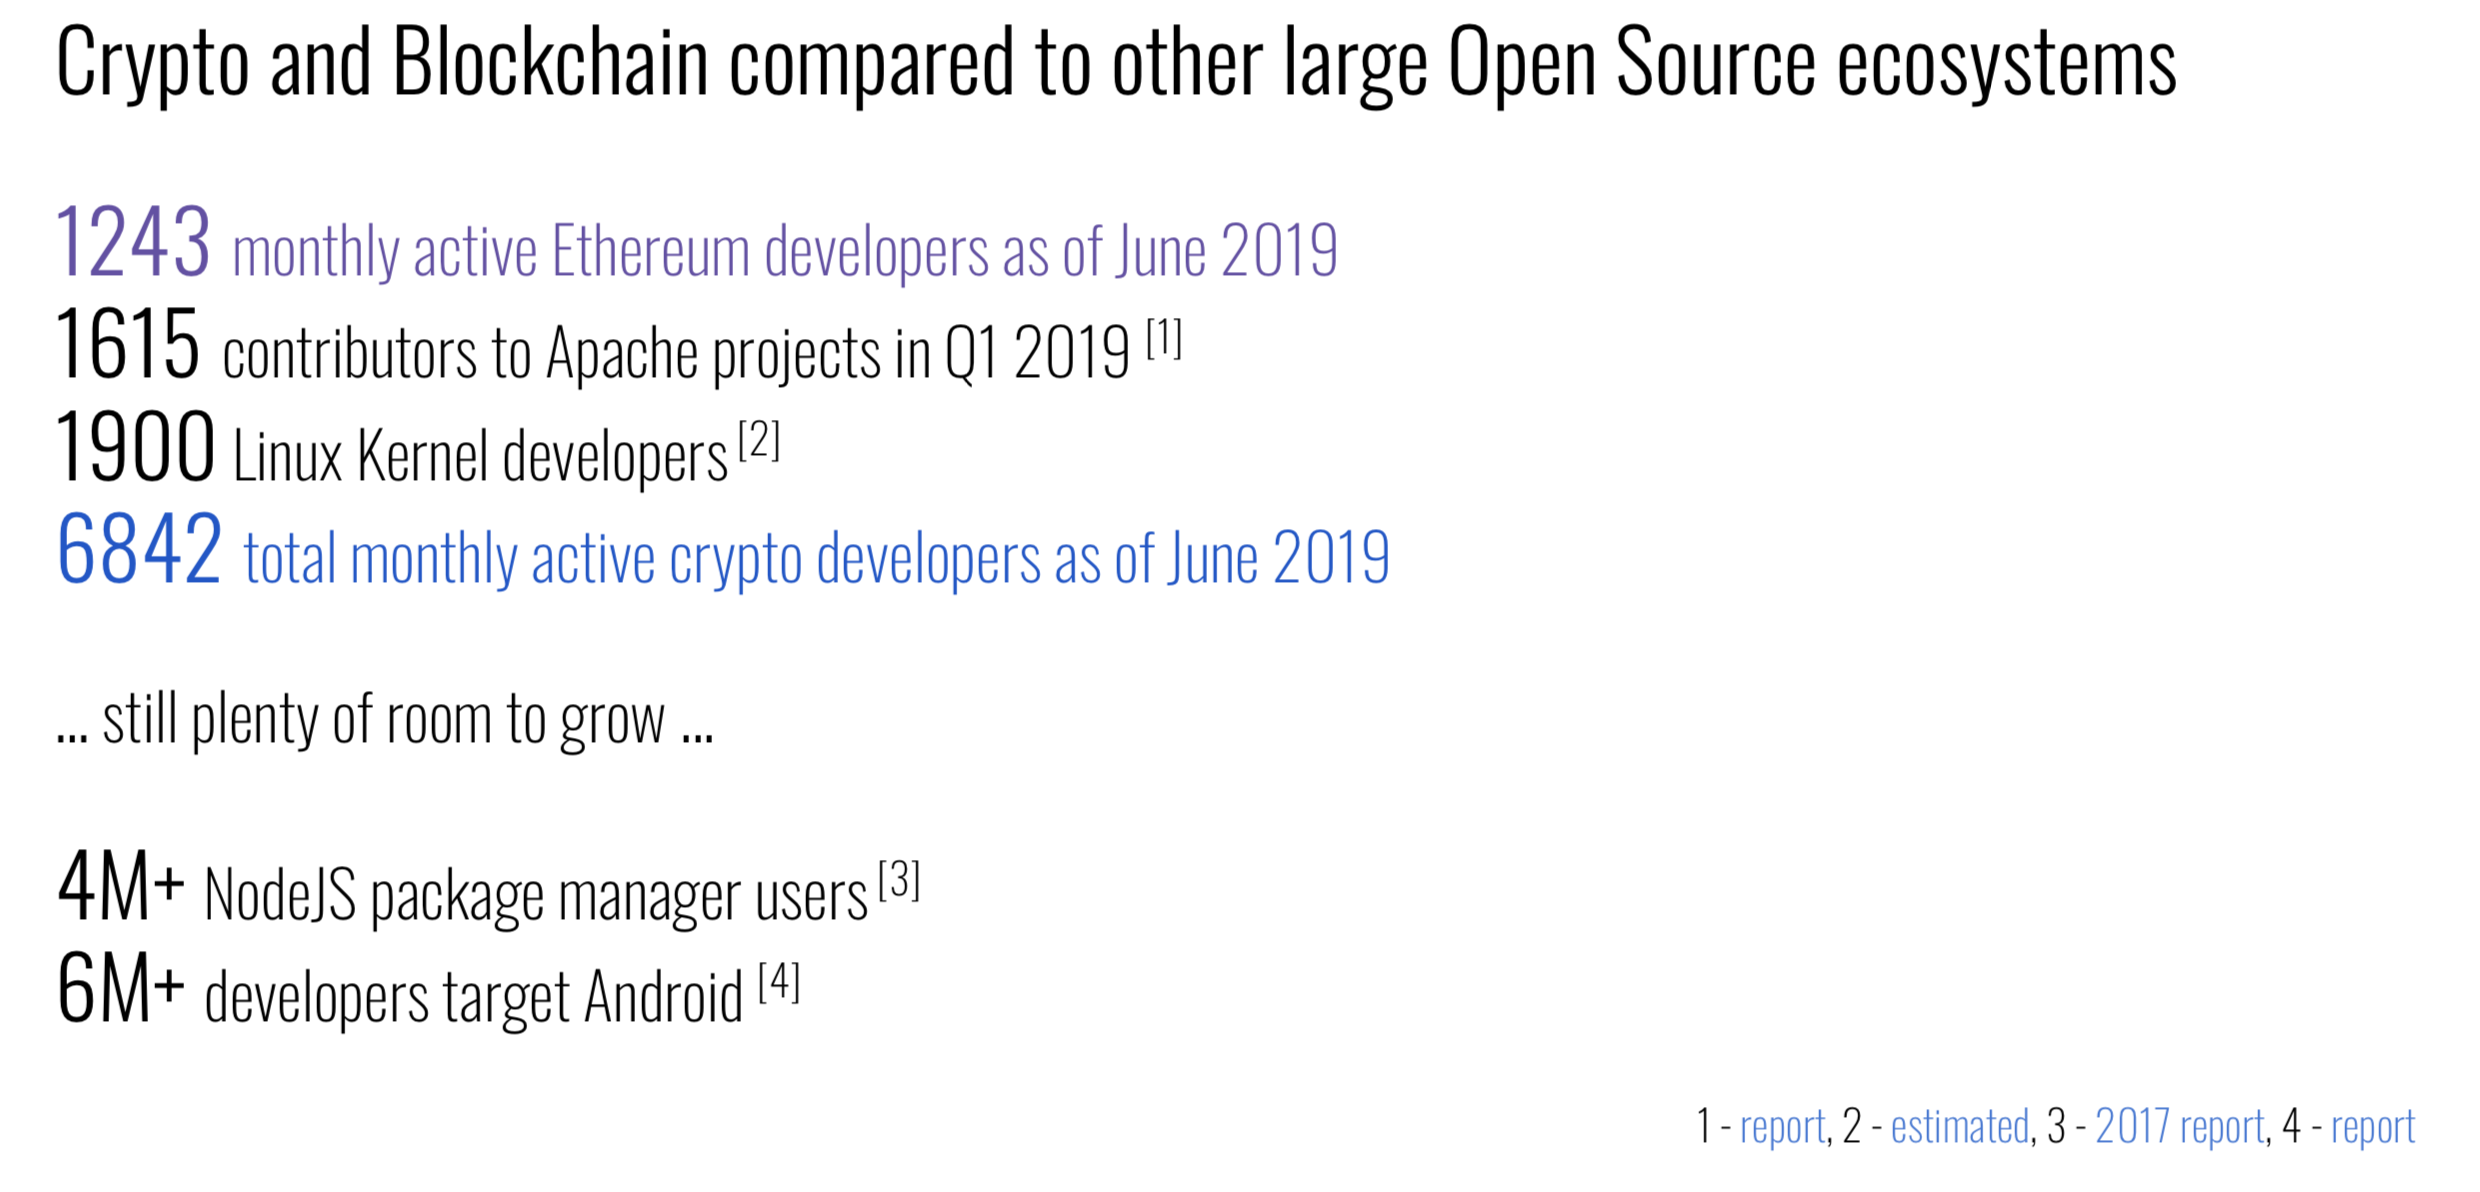 Crypto and Blockchain Compared to Other Large Open Source Ecosystems